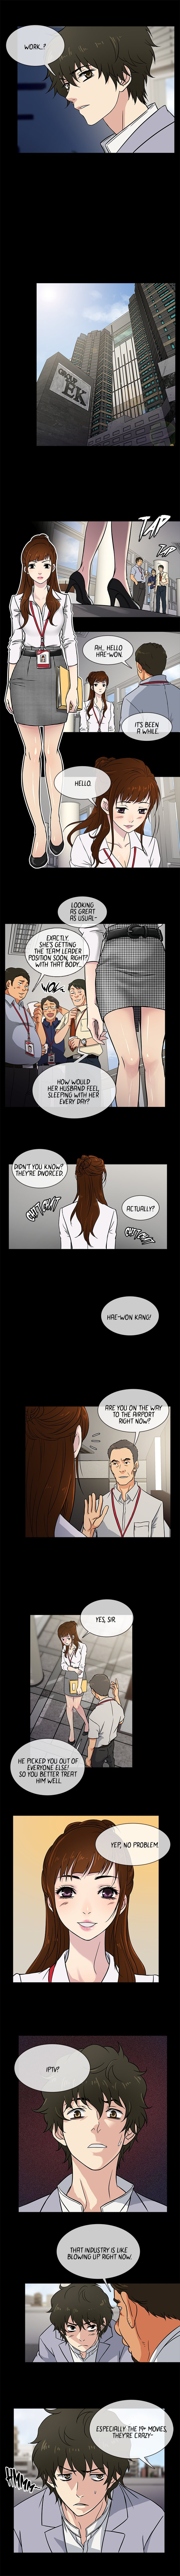 She’s Back - Chapter 2 Page 7